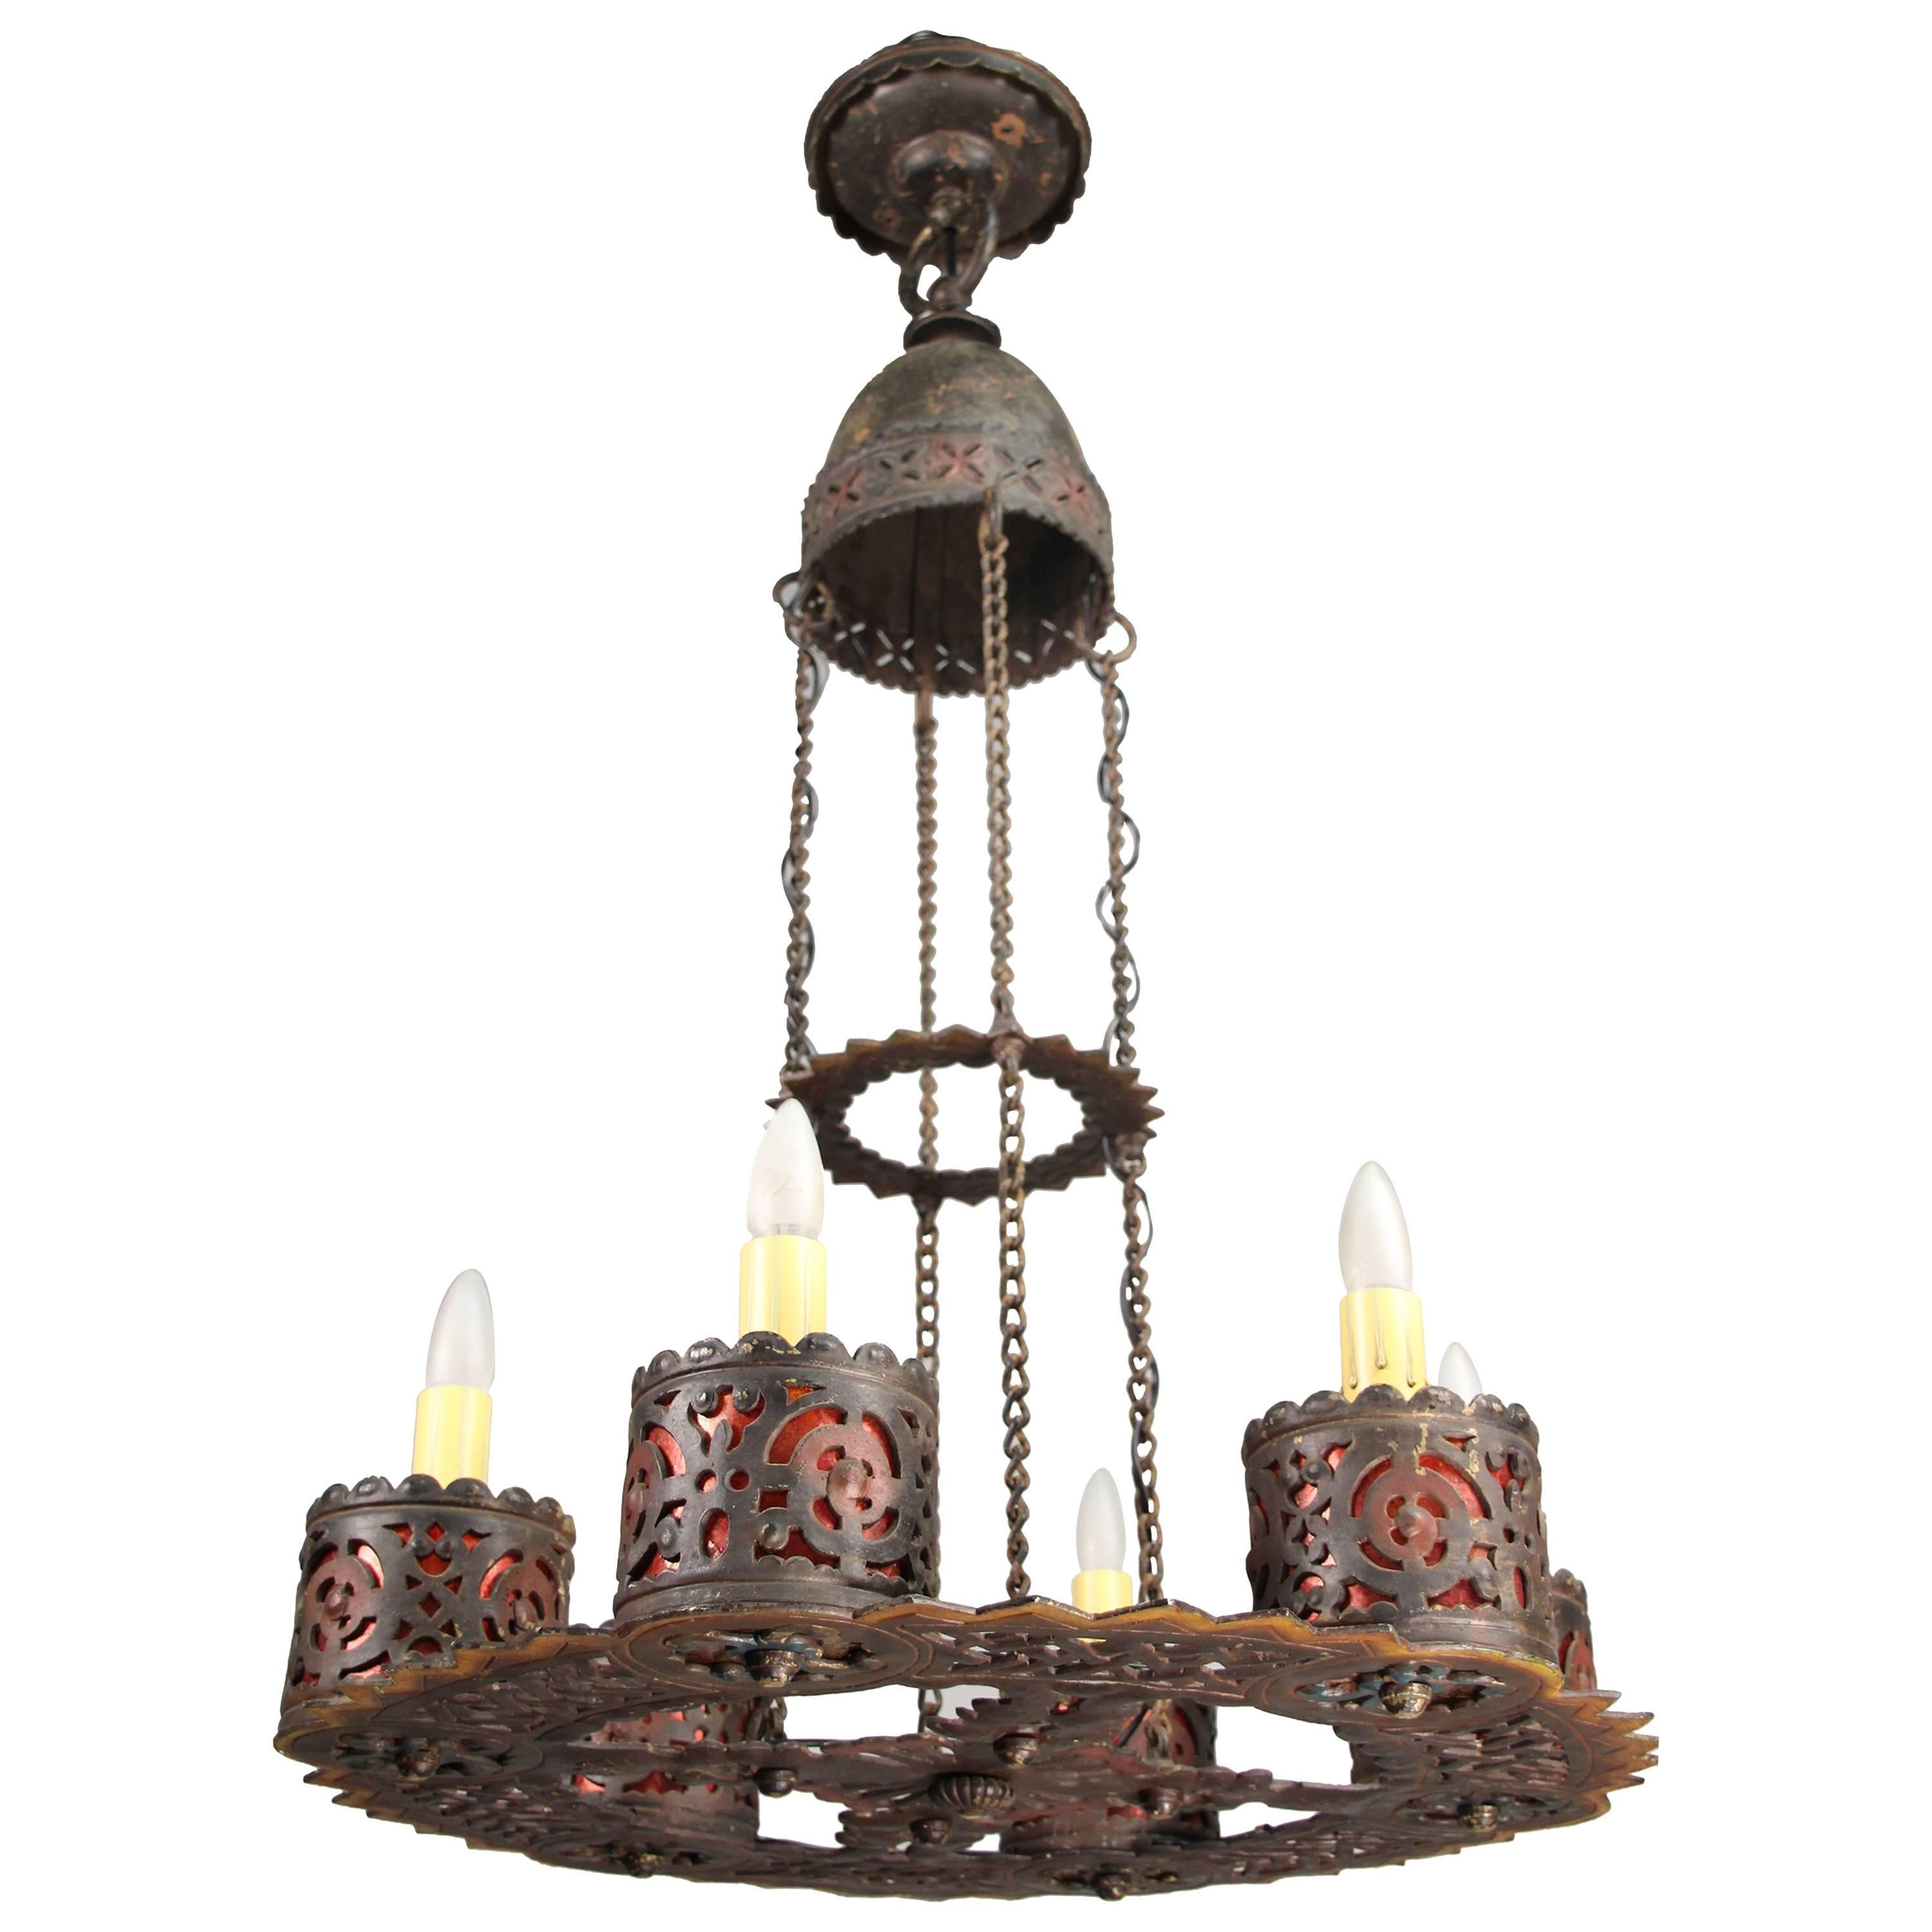 Outstanding 1920s Wrought Iron Chandelier with Polychrome, Oscar Bach Attributed